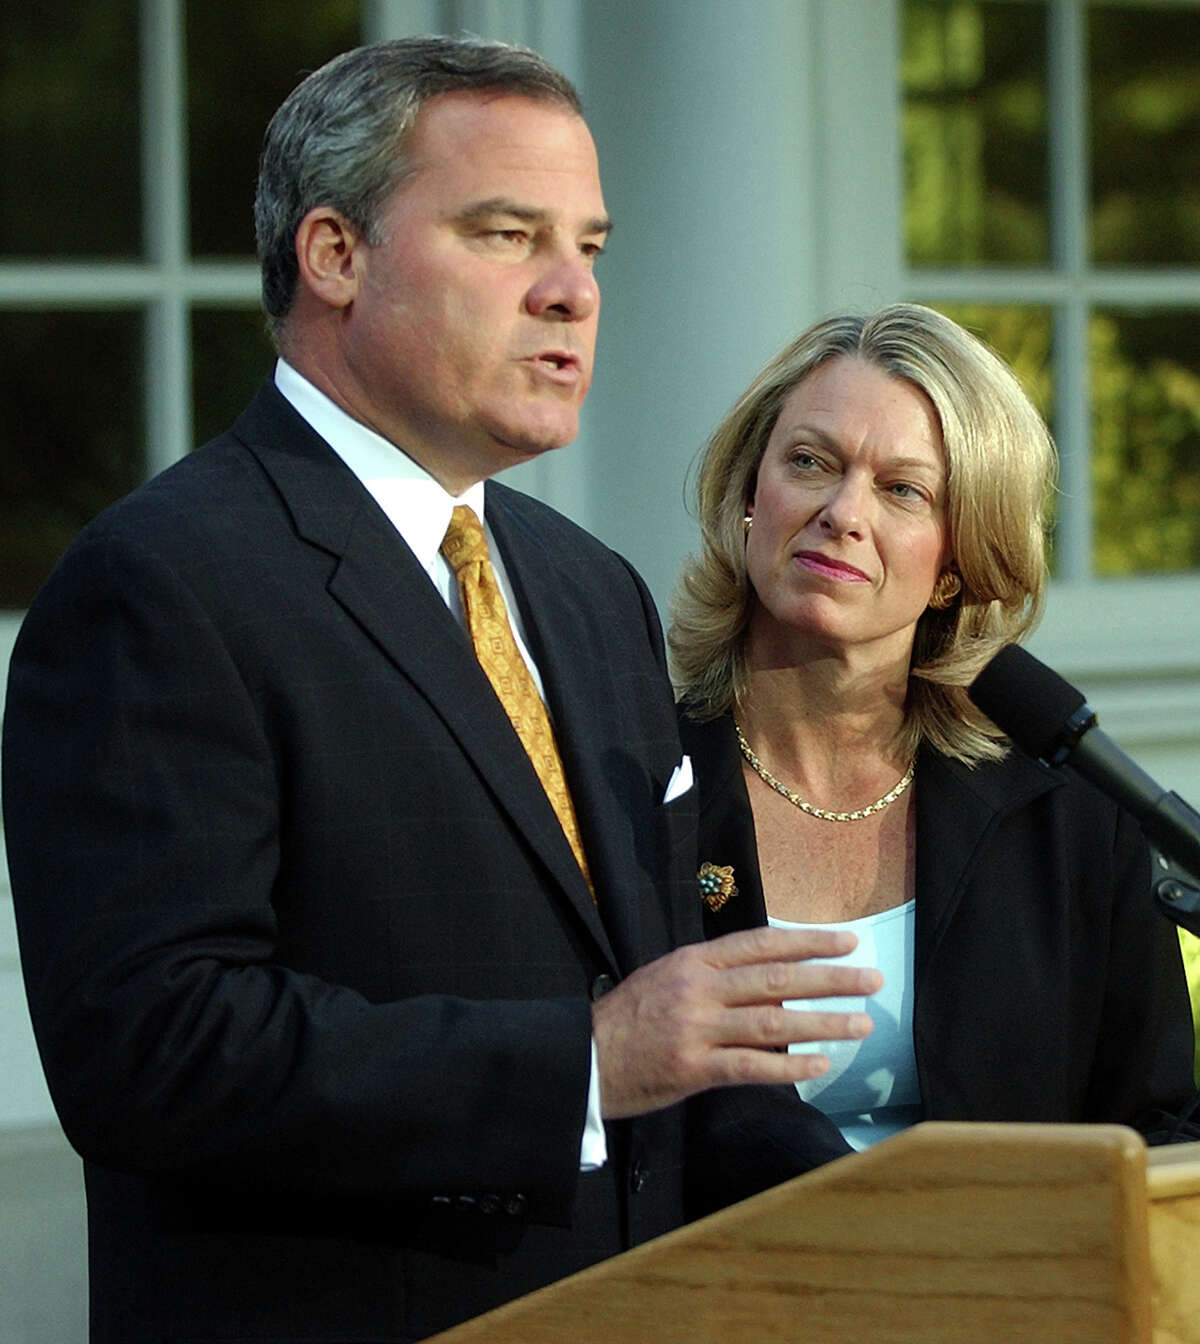 Connecticut Gov. John G. Rowland, with his wife Patty beside him, announces his resignation from office at the governor's mansion in Hartford, Conn., Monday, June 21, 2004. Rowland said he will resign effective at noon, July 1, 2004.